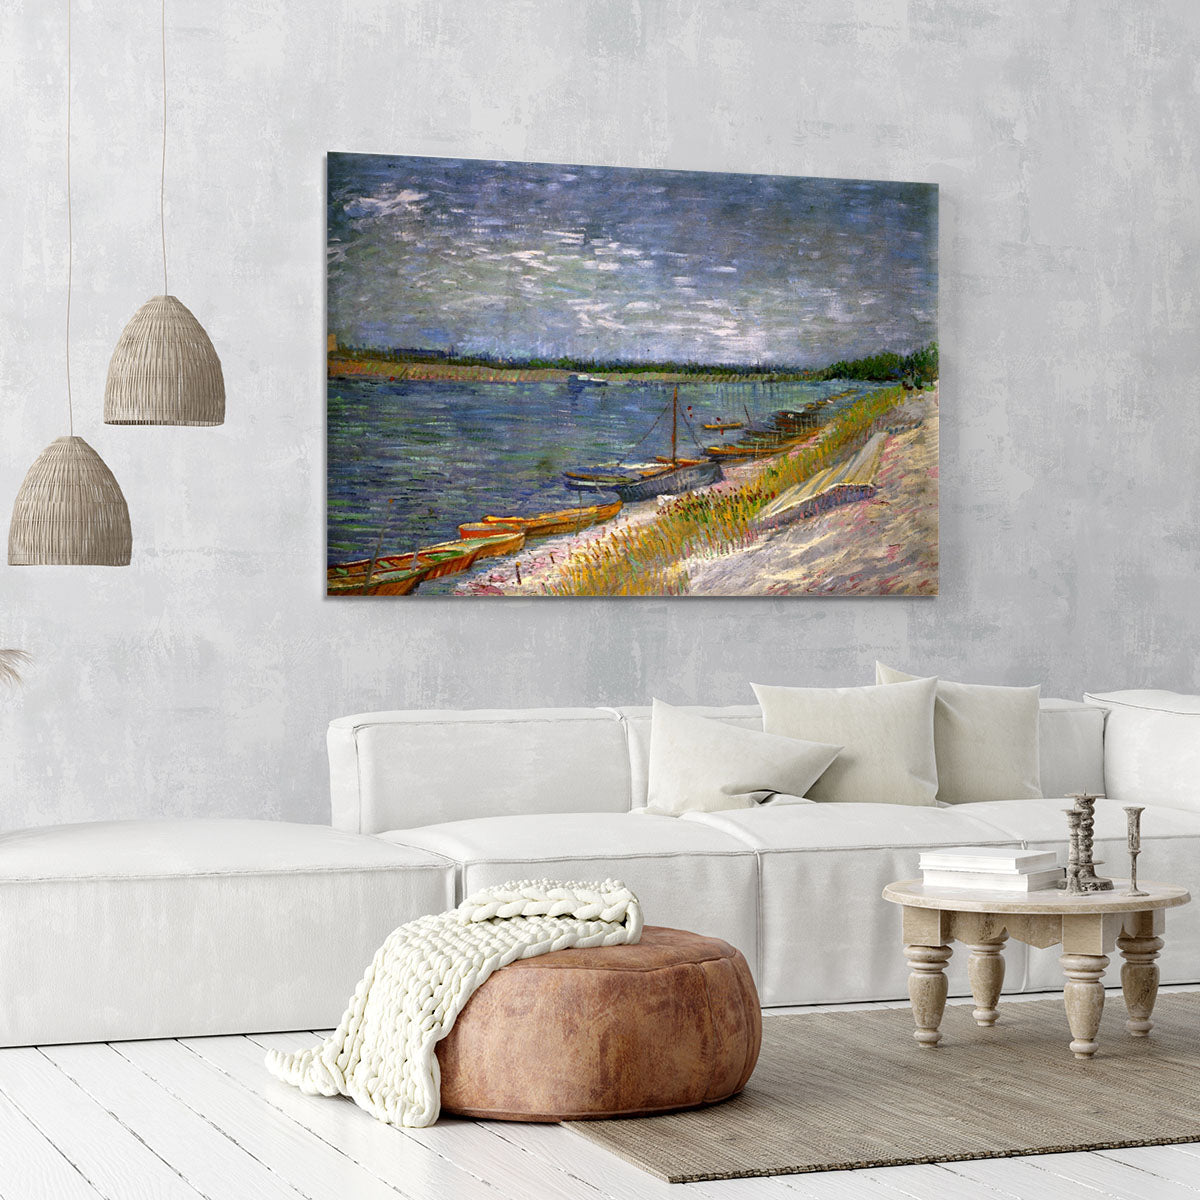 View of a River with Rowing Boats by Van Gogh Canvas Print or Poster - Canvas Art Rocks - 6